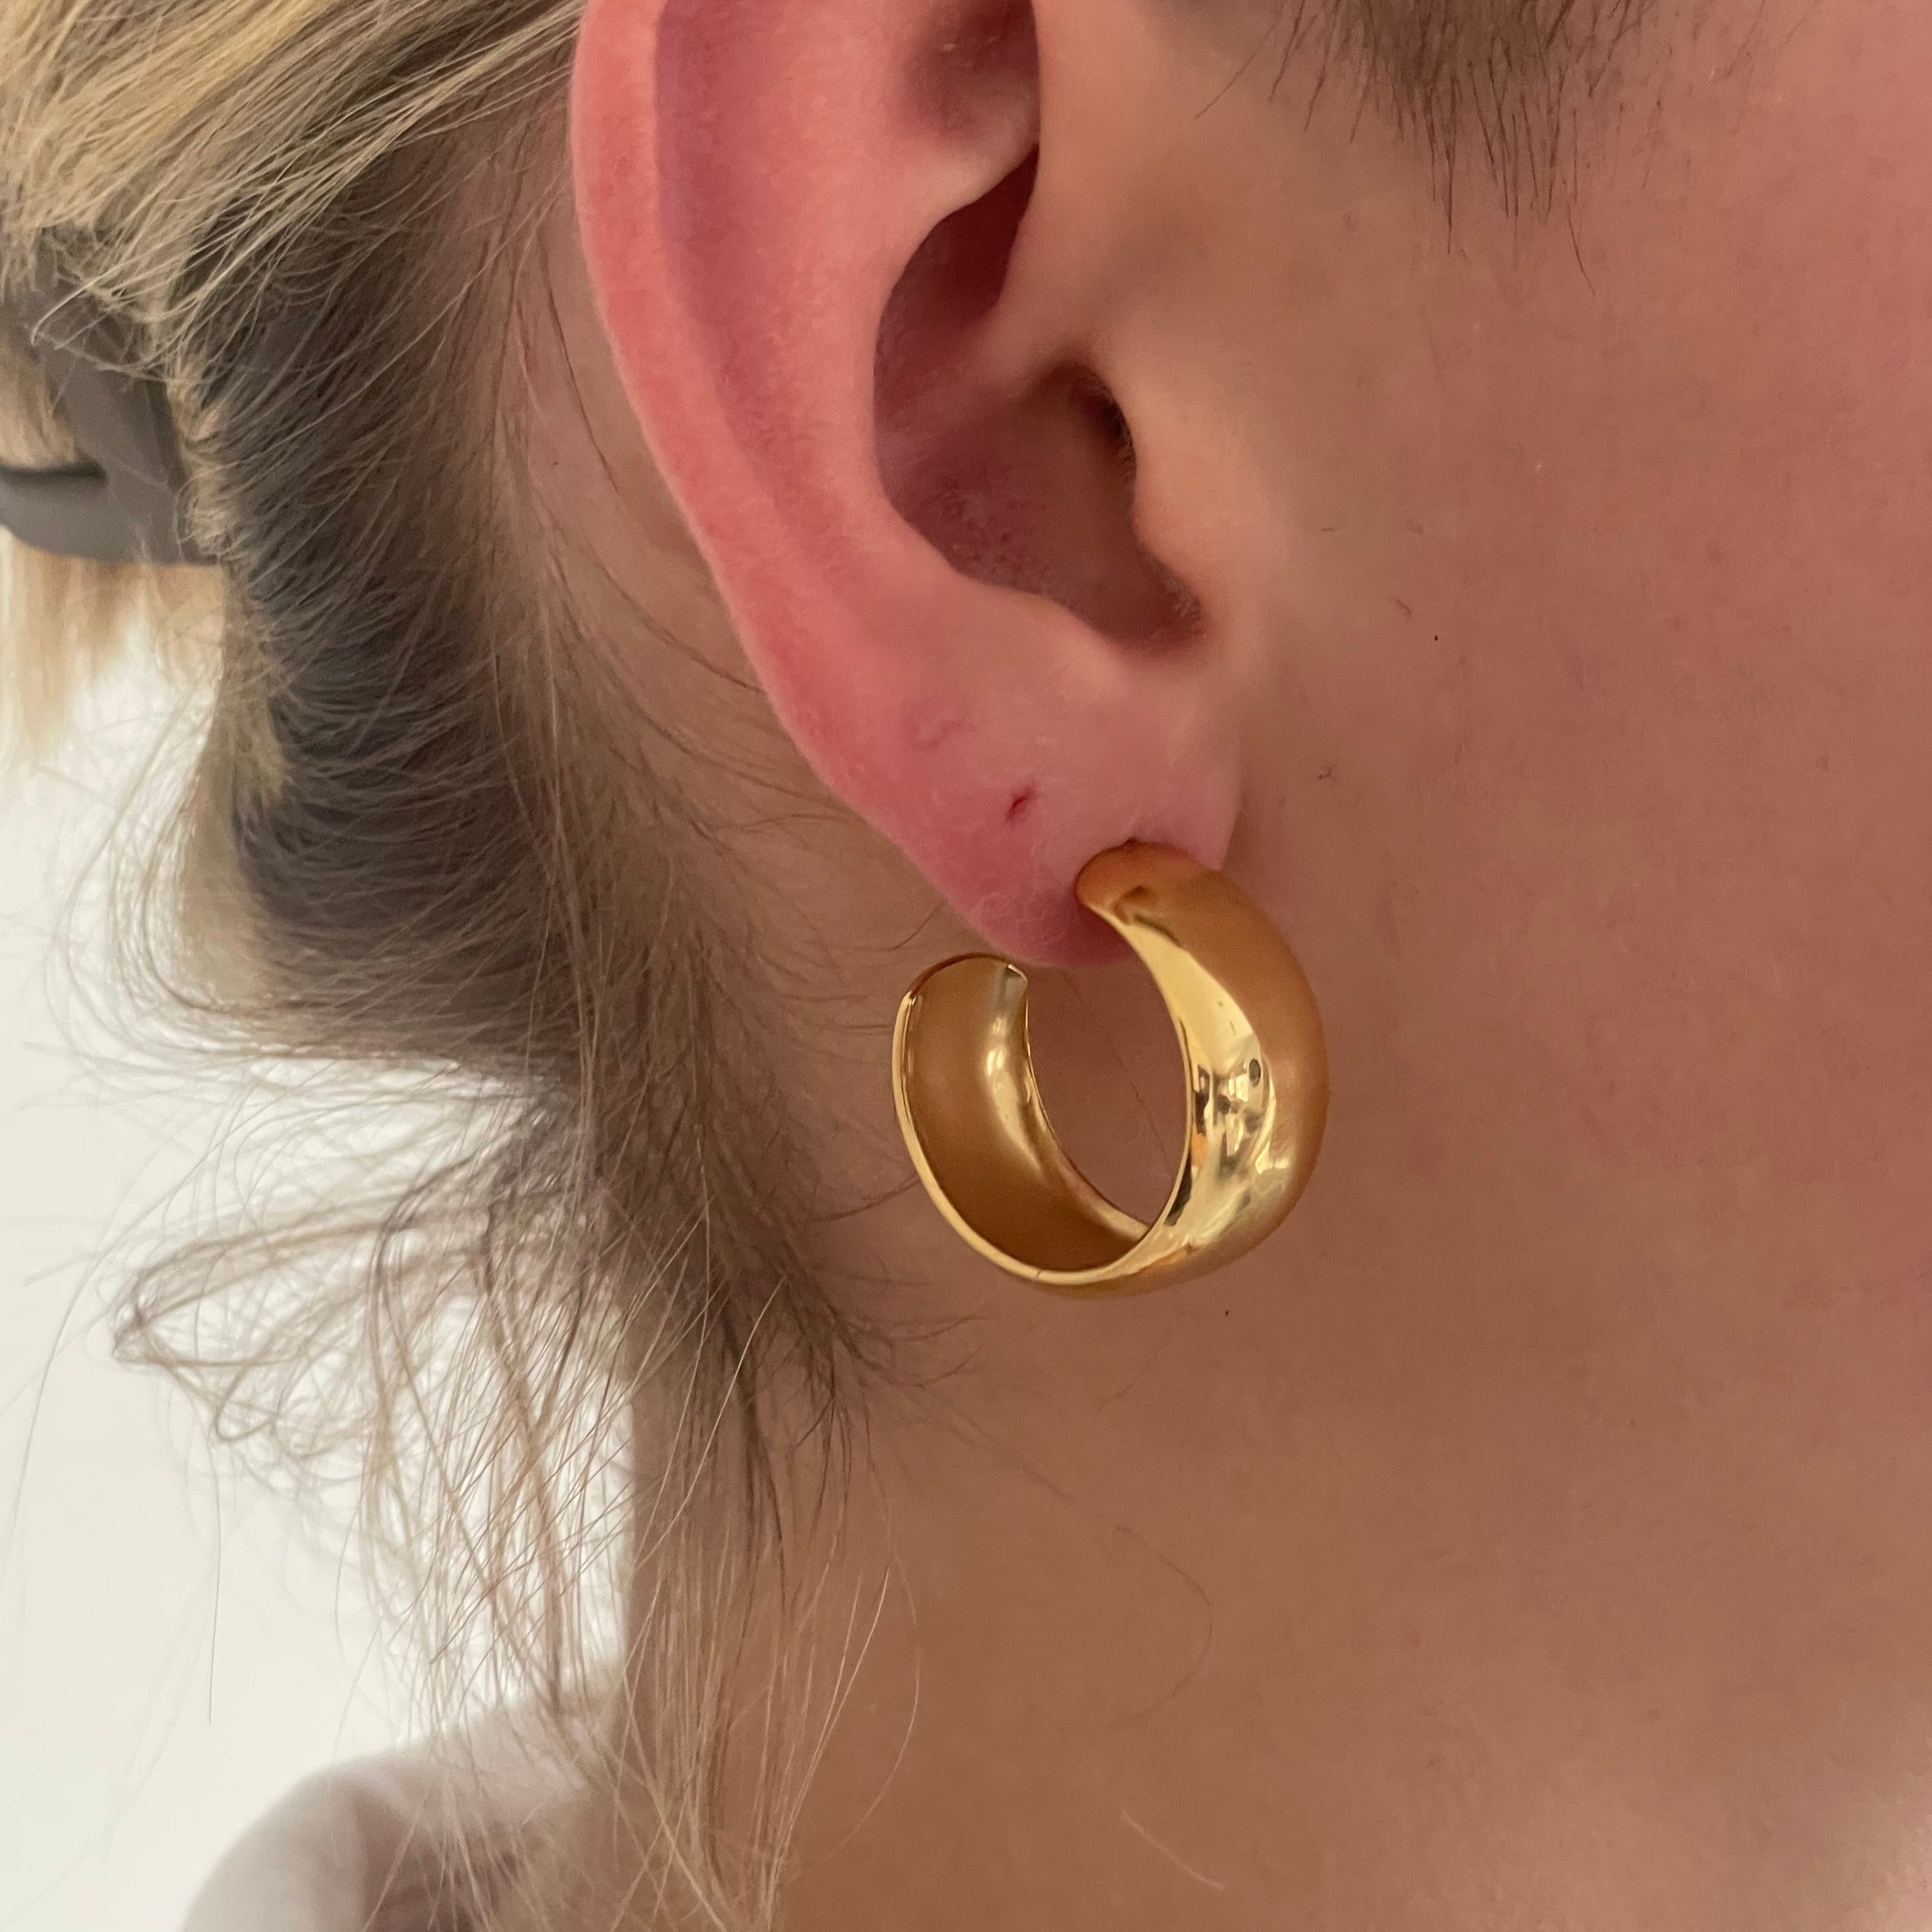 Versatile Chunky Gold Hoops for Any Occasion